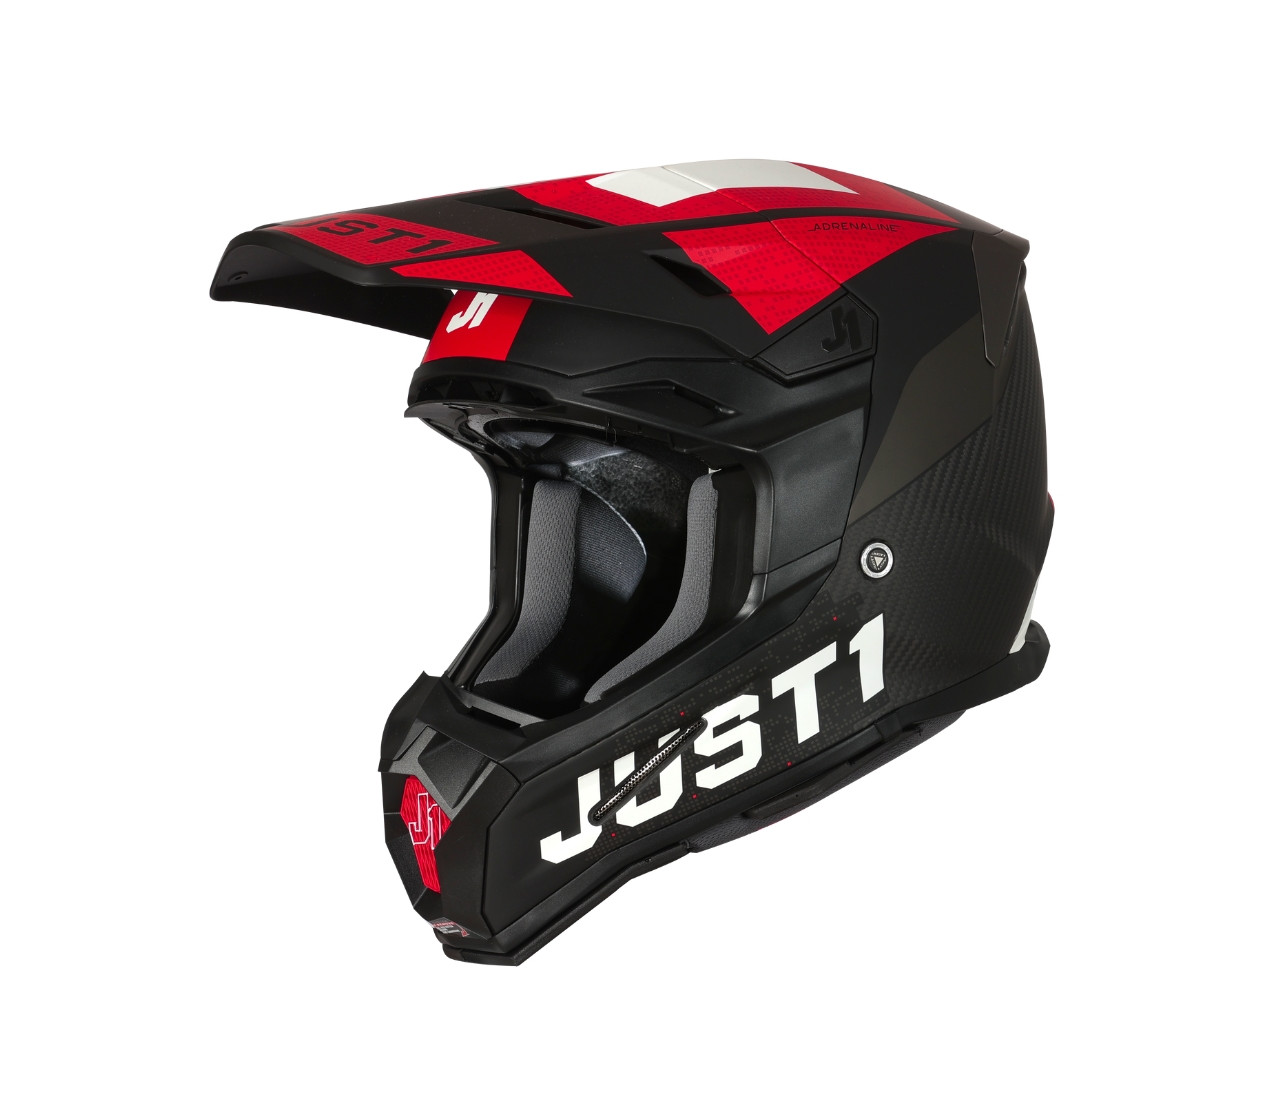 JUST1 J22 YOUTH ADRENALINE RED CARBON